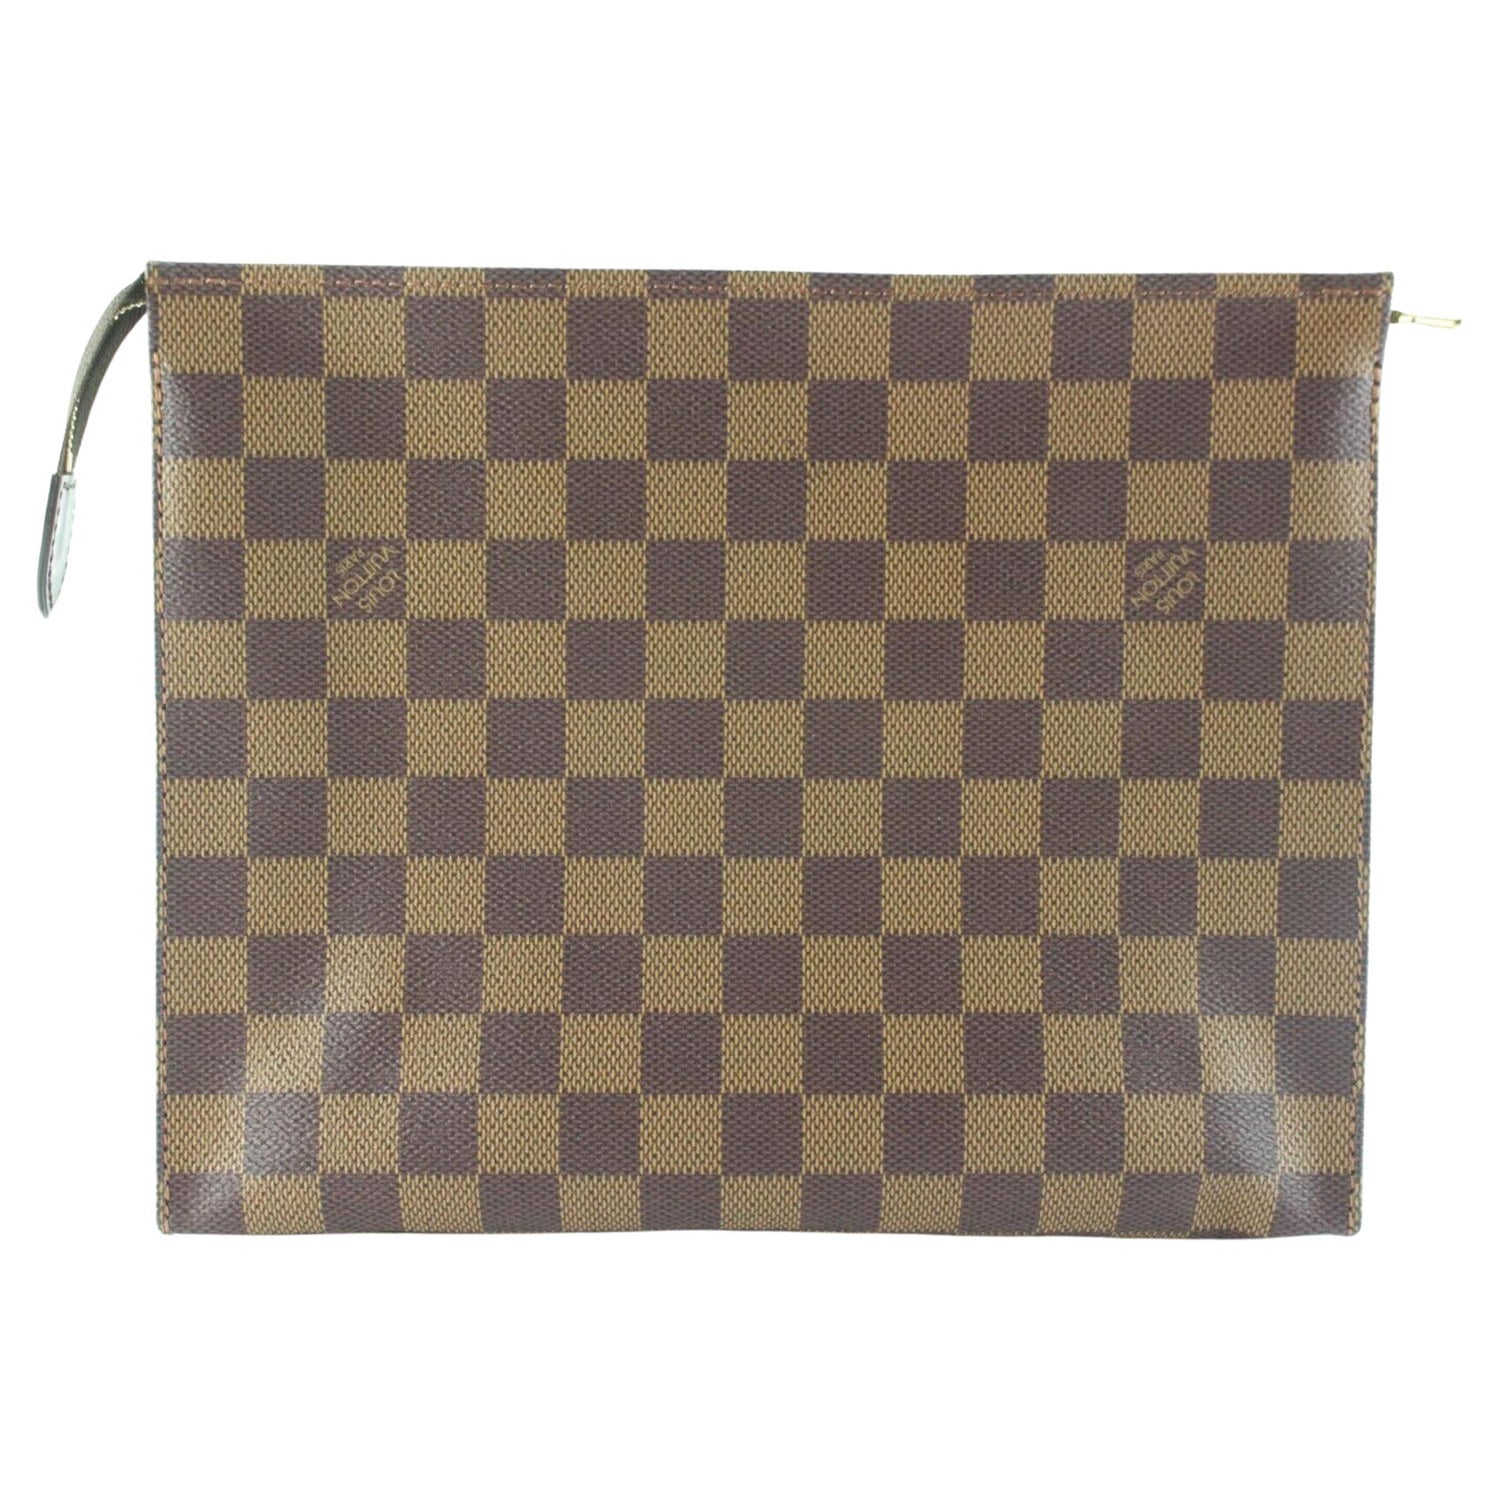 Louis Vuitton Monogram Knit Face Mask 94lz526s For Sale at 1stDibs